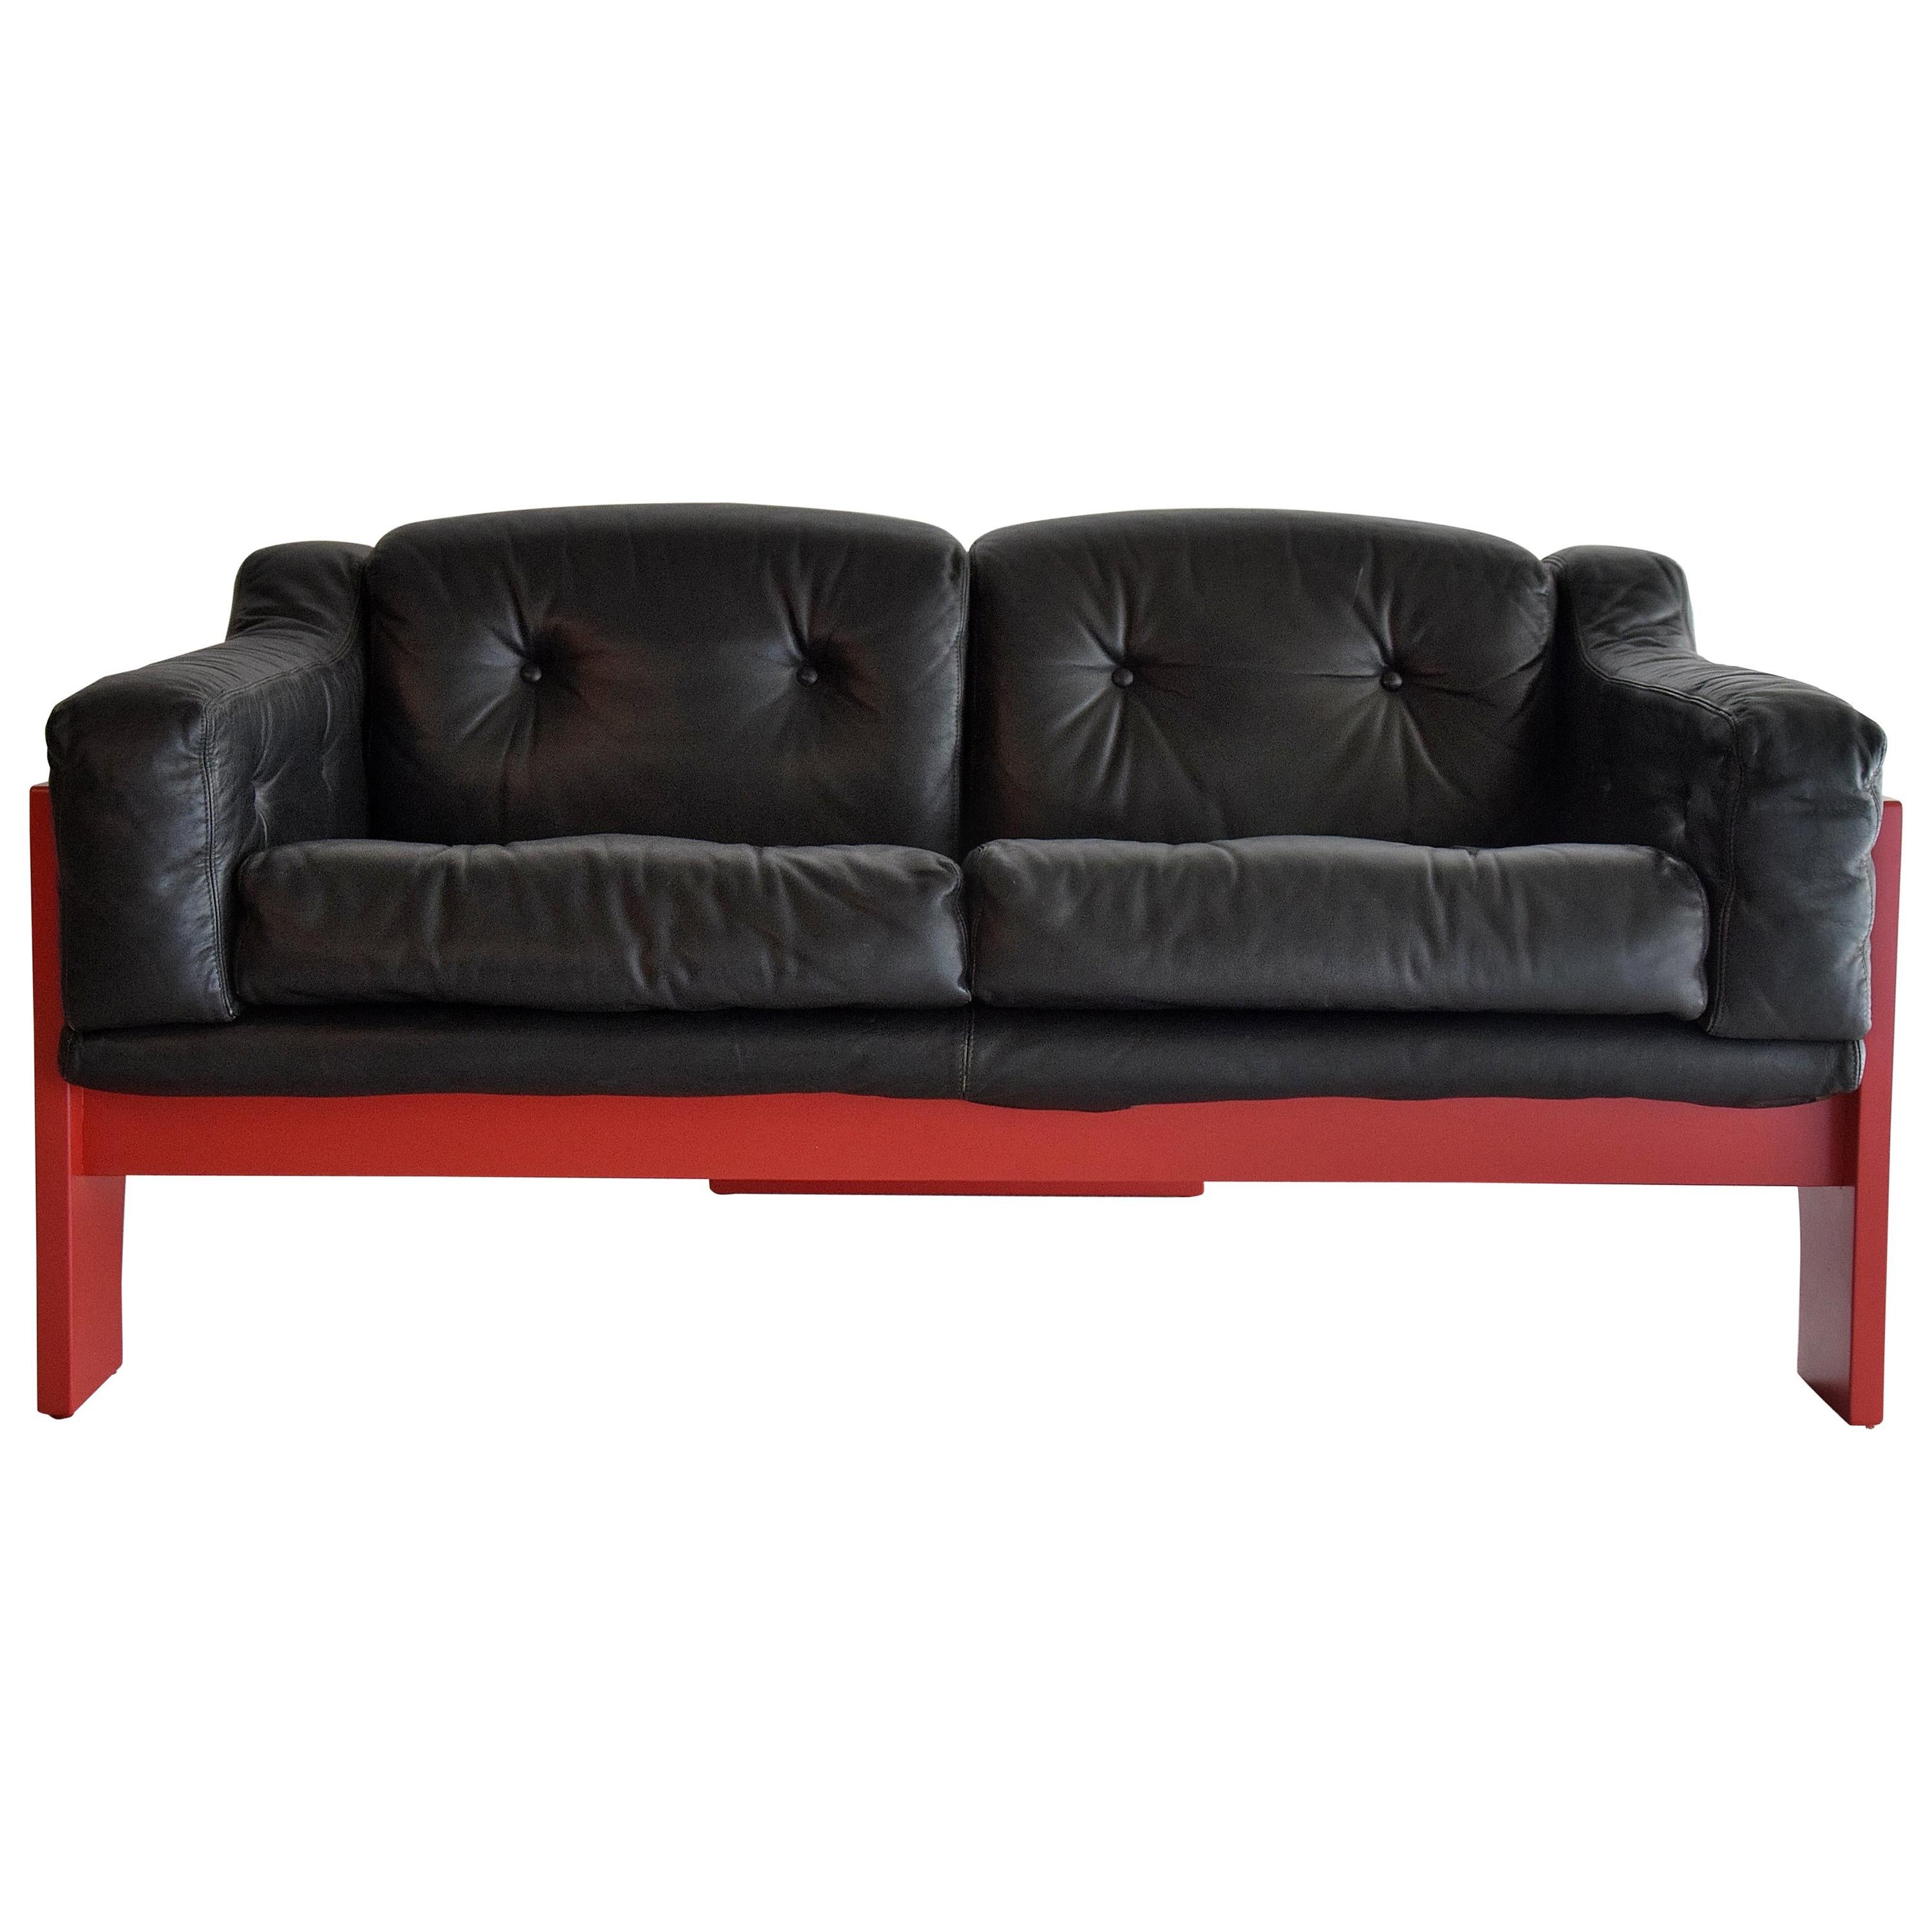 Mid-Century Modern Red and Black Sofa by Claudio Salocchi for Sormani